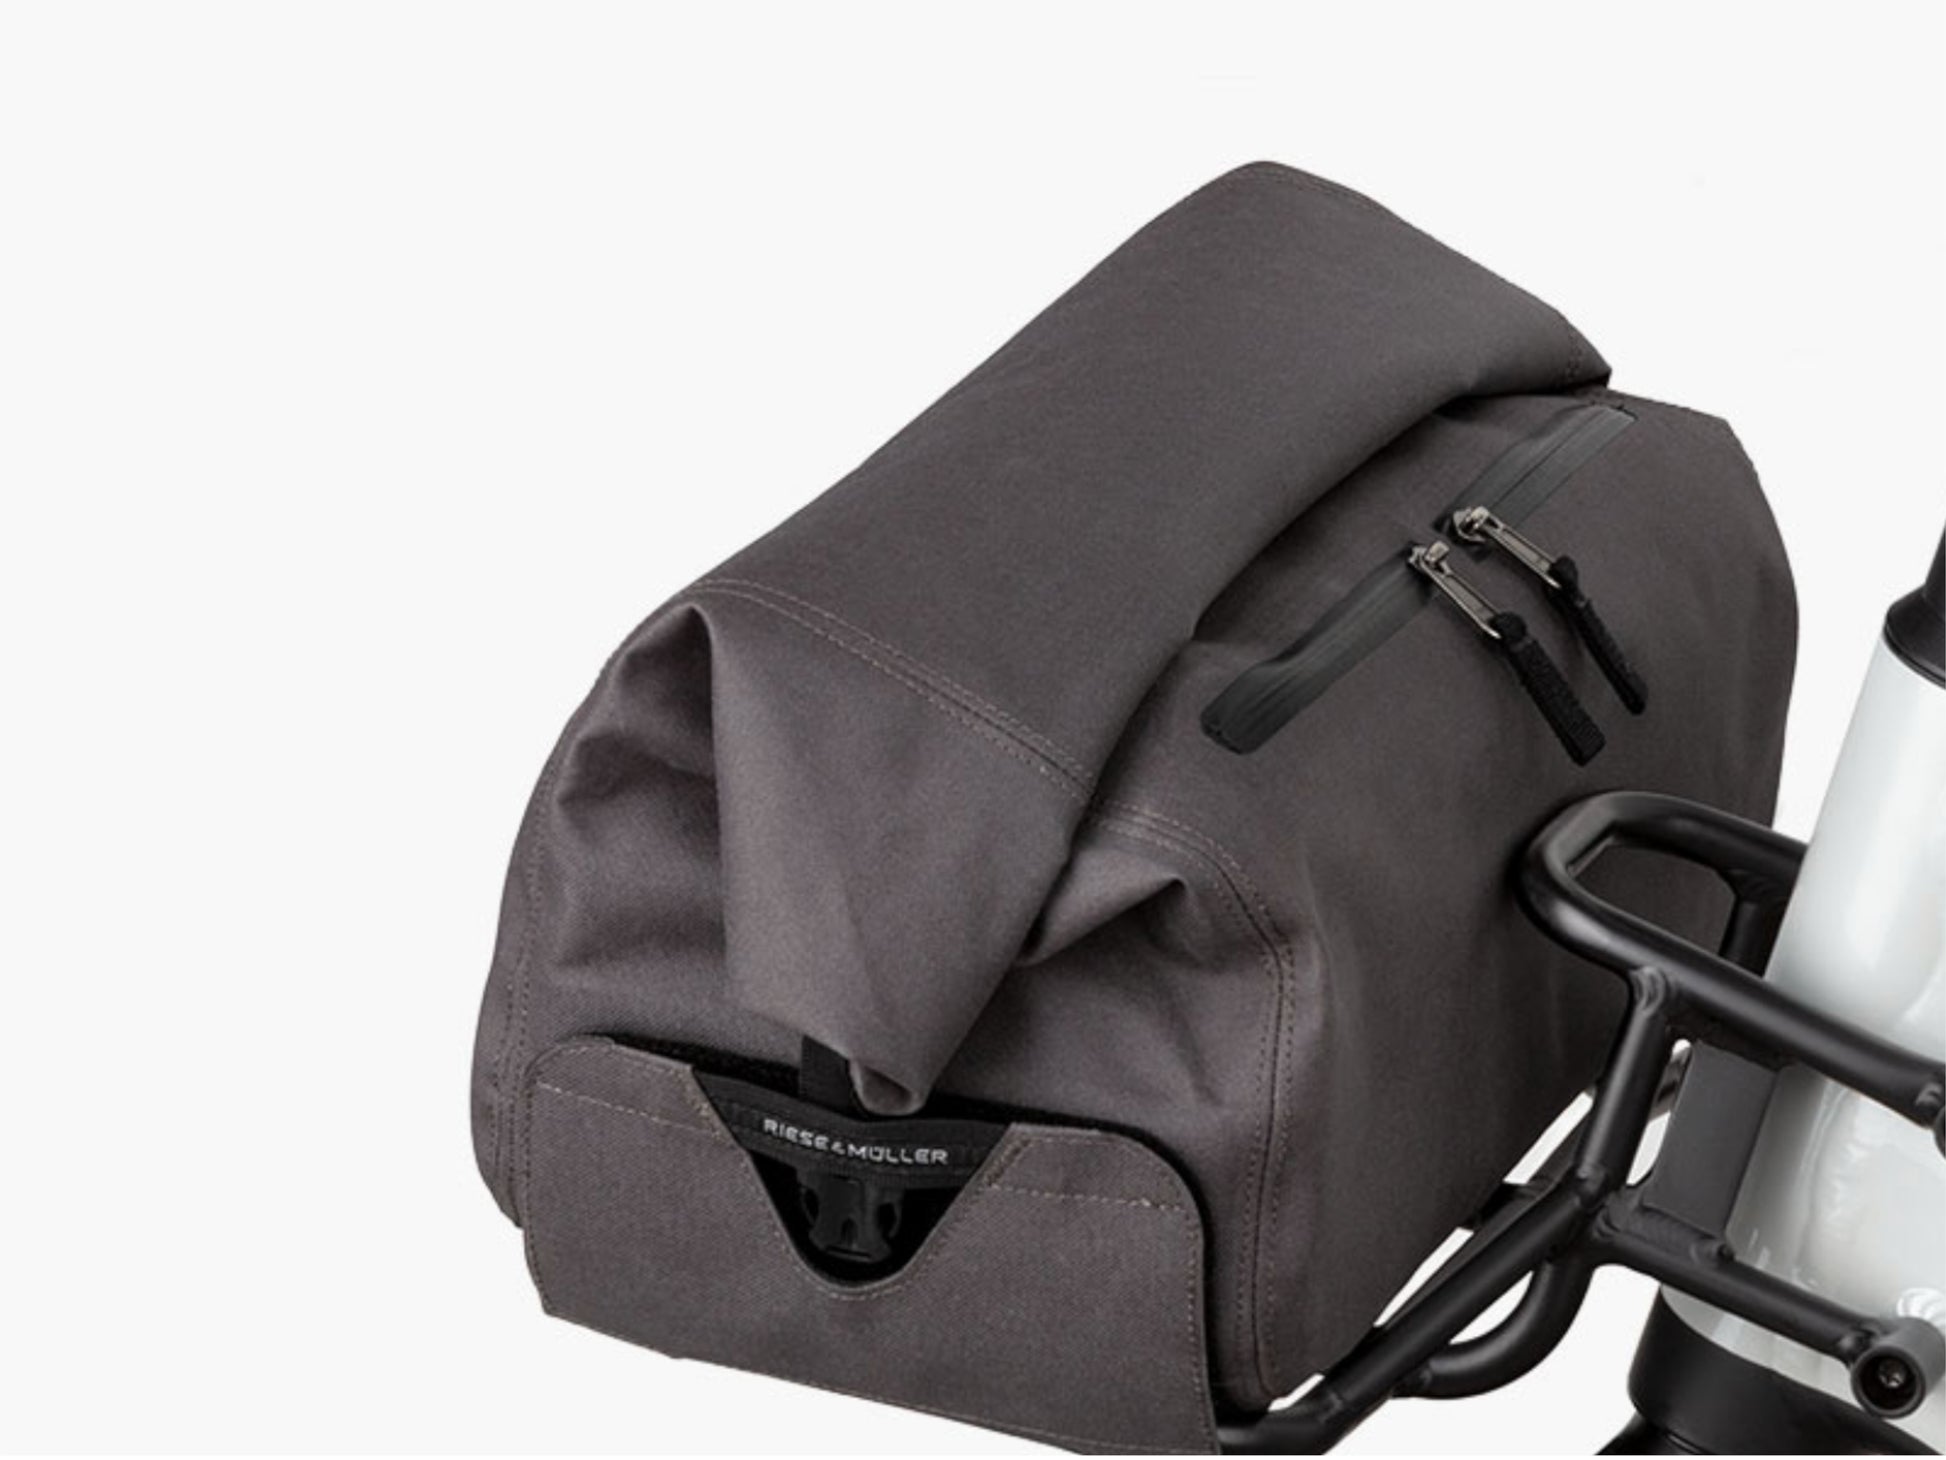 Riese and Muller Multicharger Mixte GT Touring 750 emtb hardtail close up front carrier bag option